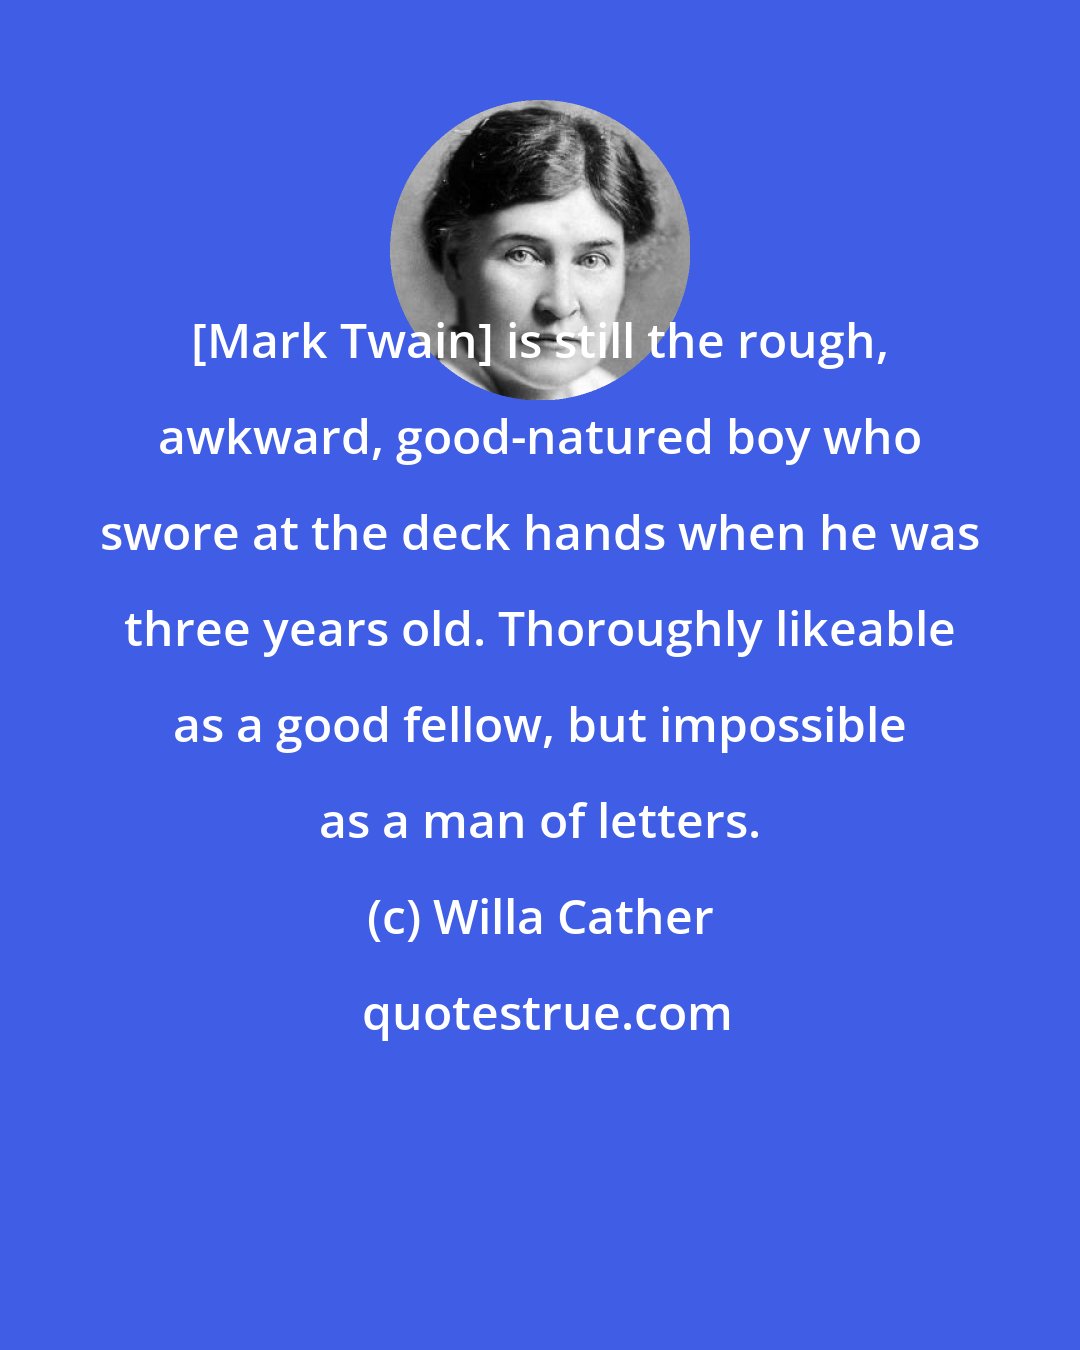 Willa Cather: [Mark Twain] is still the rough, awkward, good-natured boy who swore at the deck hands when he was three years old. Thoroughly likeable as a good fellow, but impossible as a man of letters.